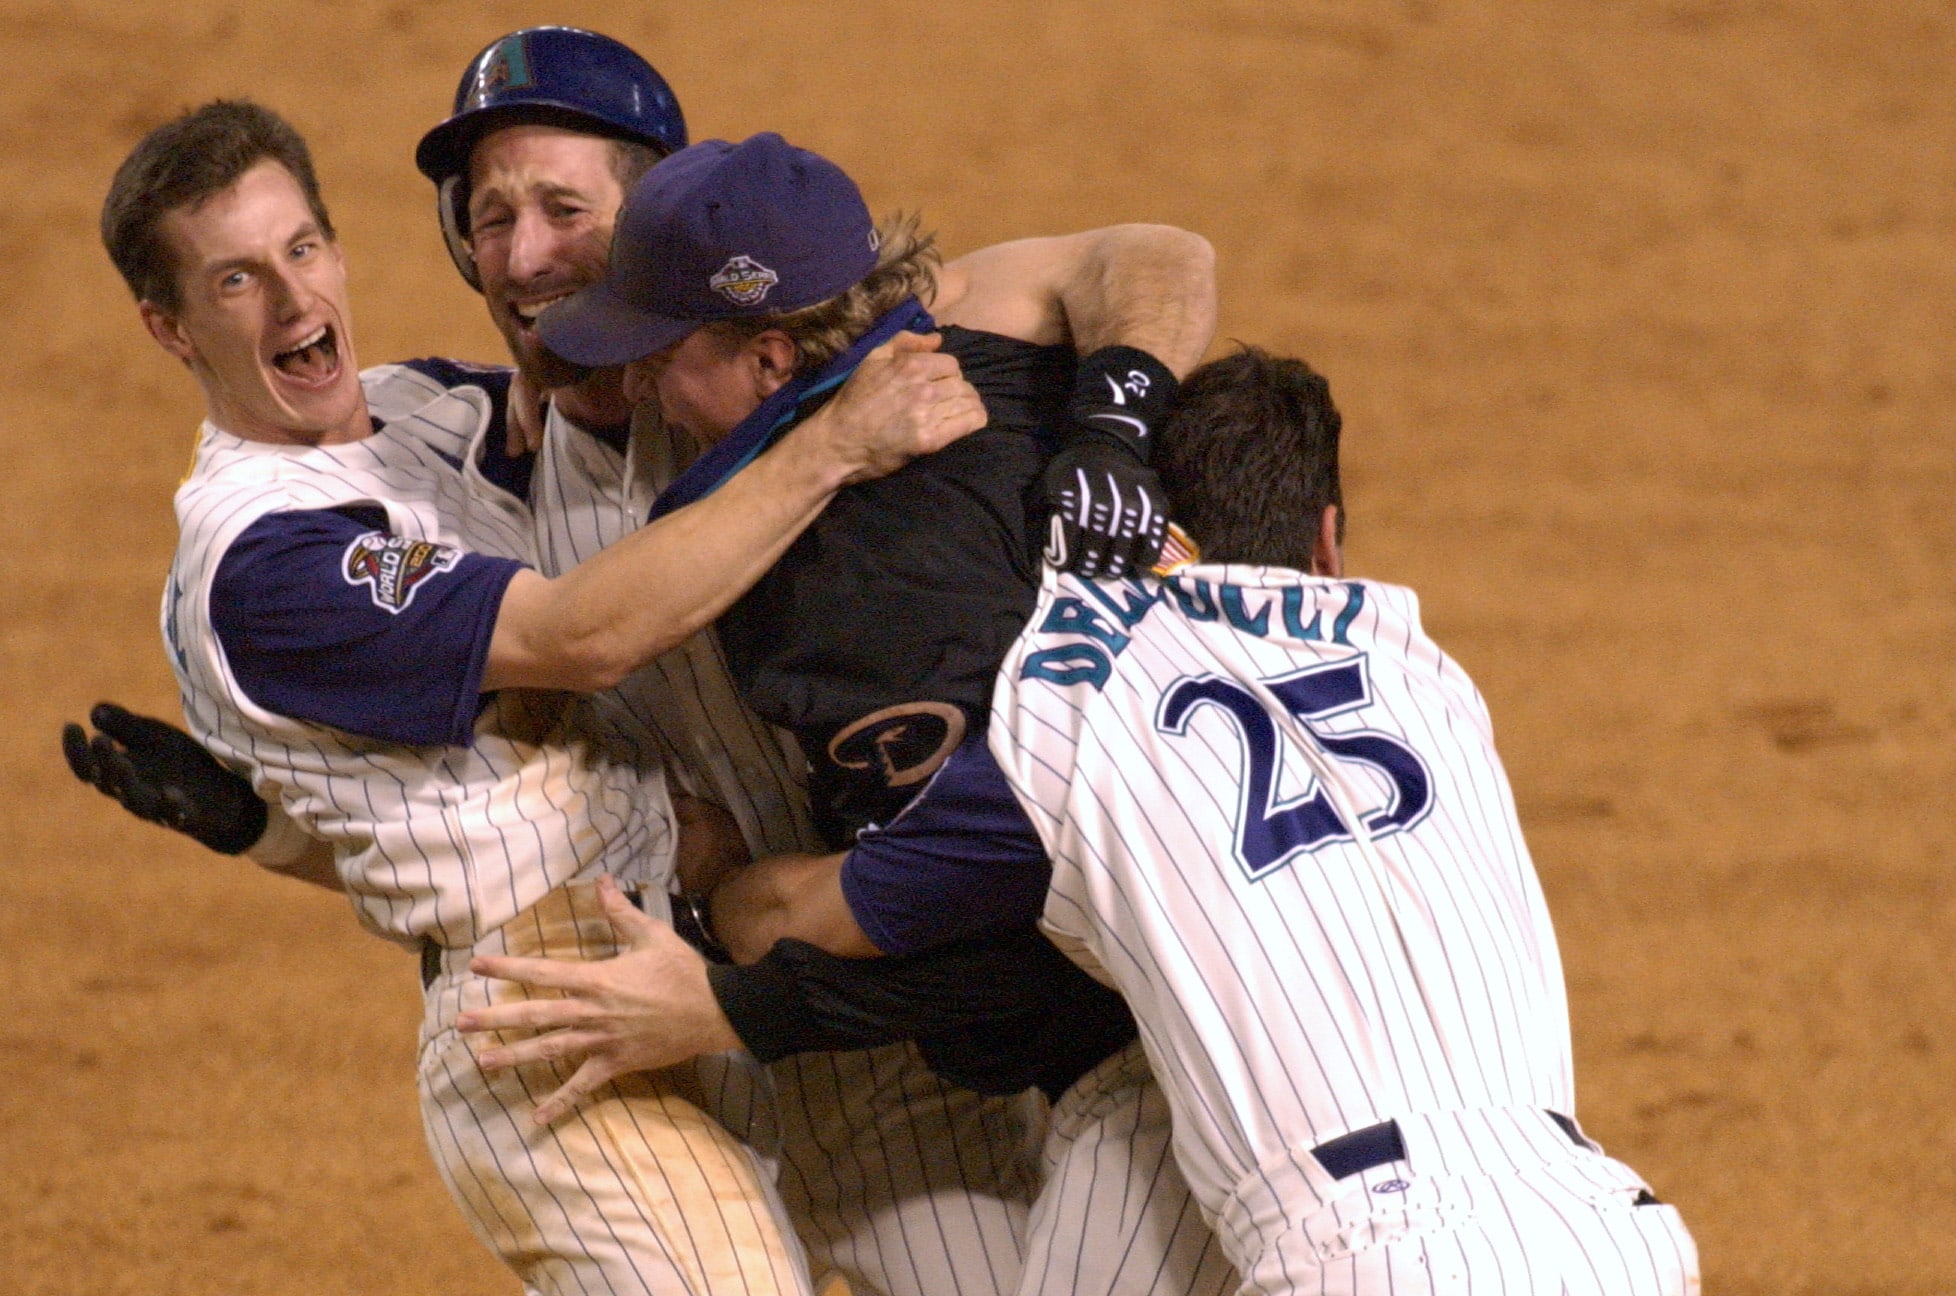 New York Mets: 10 Most Embarrassing Moments in Franchise History